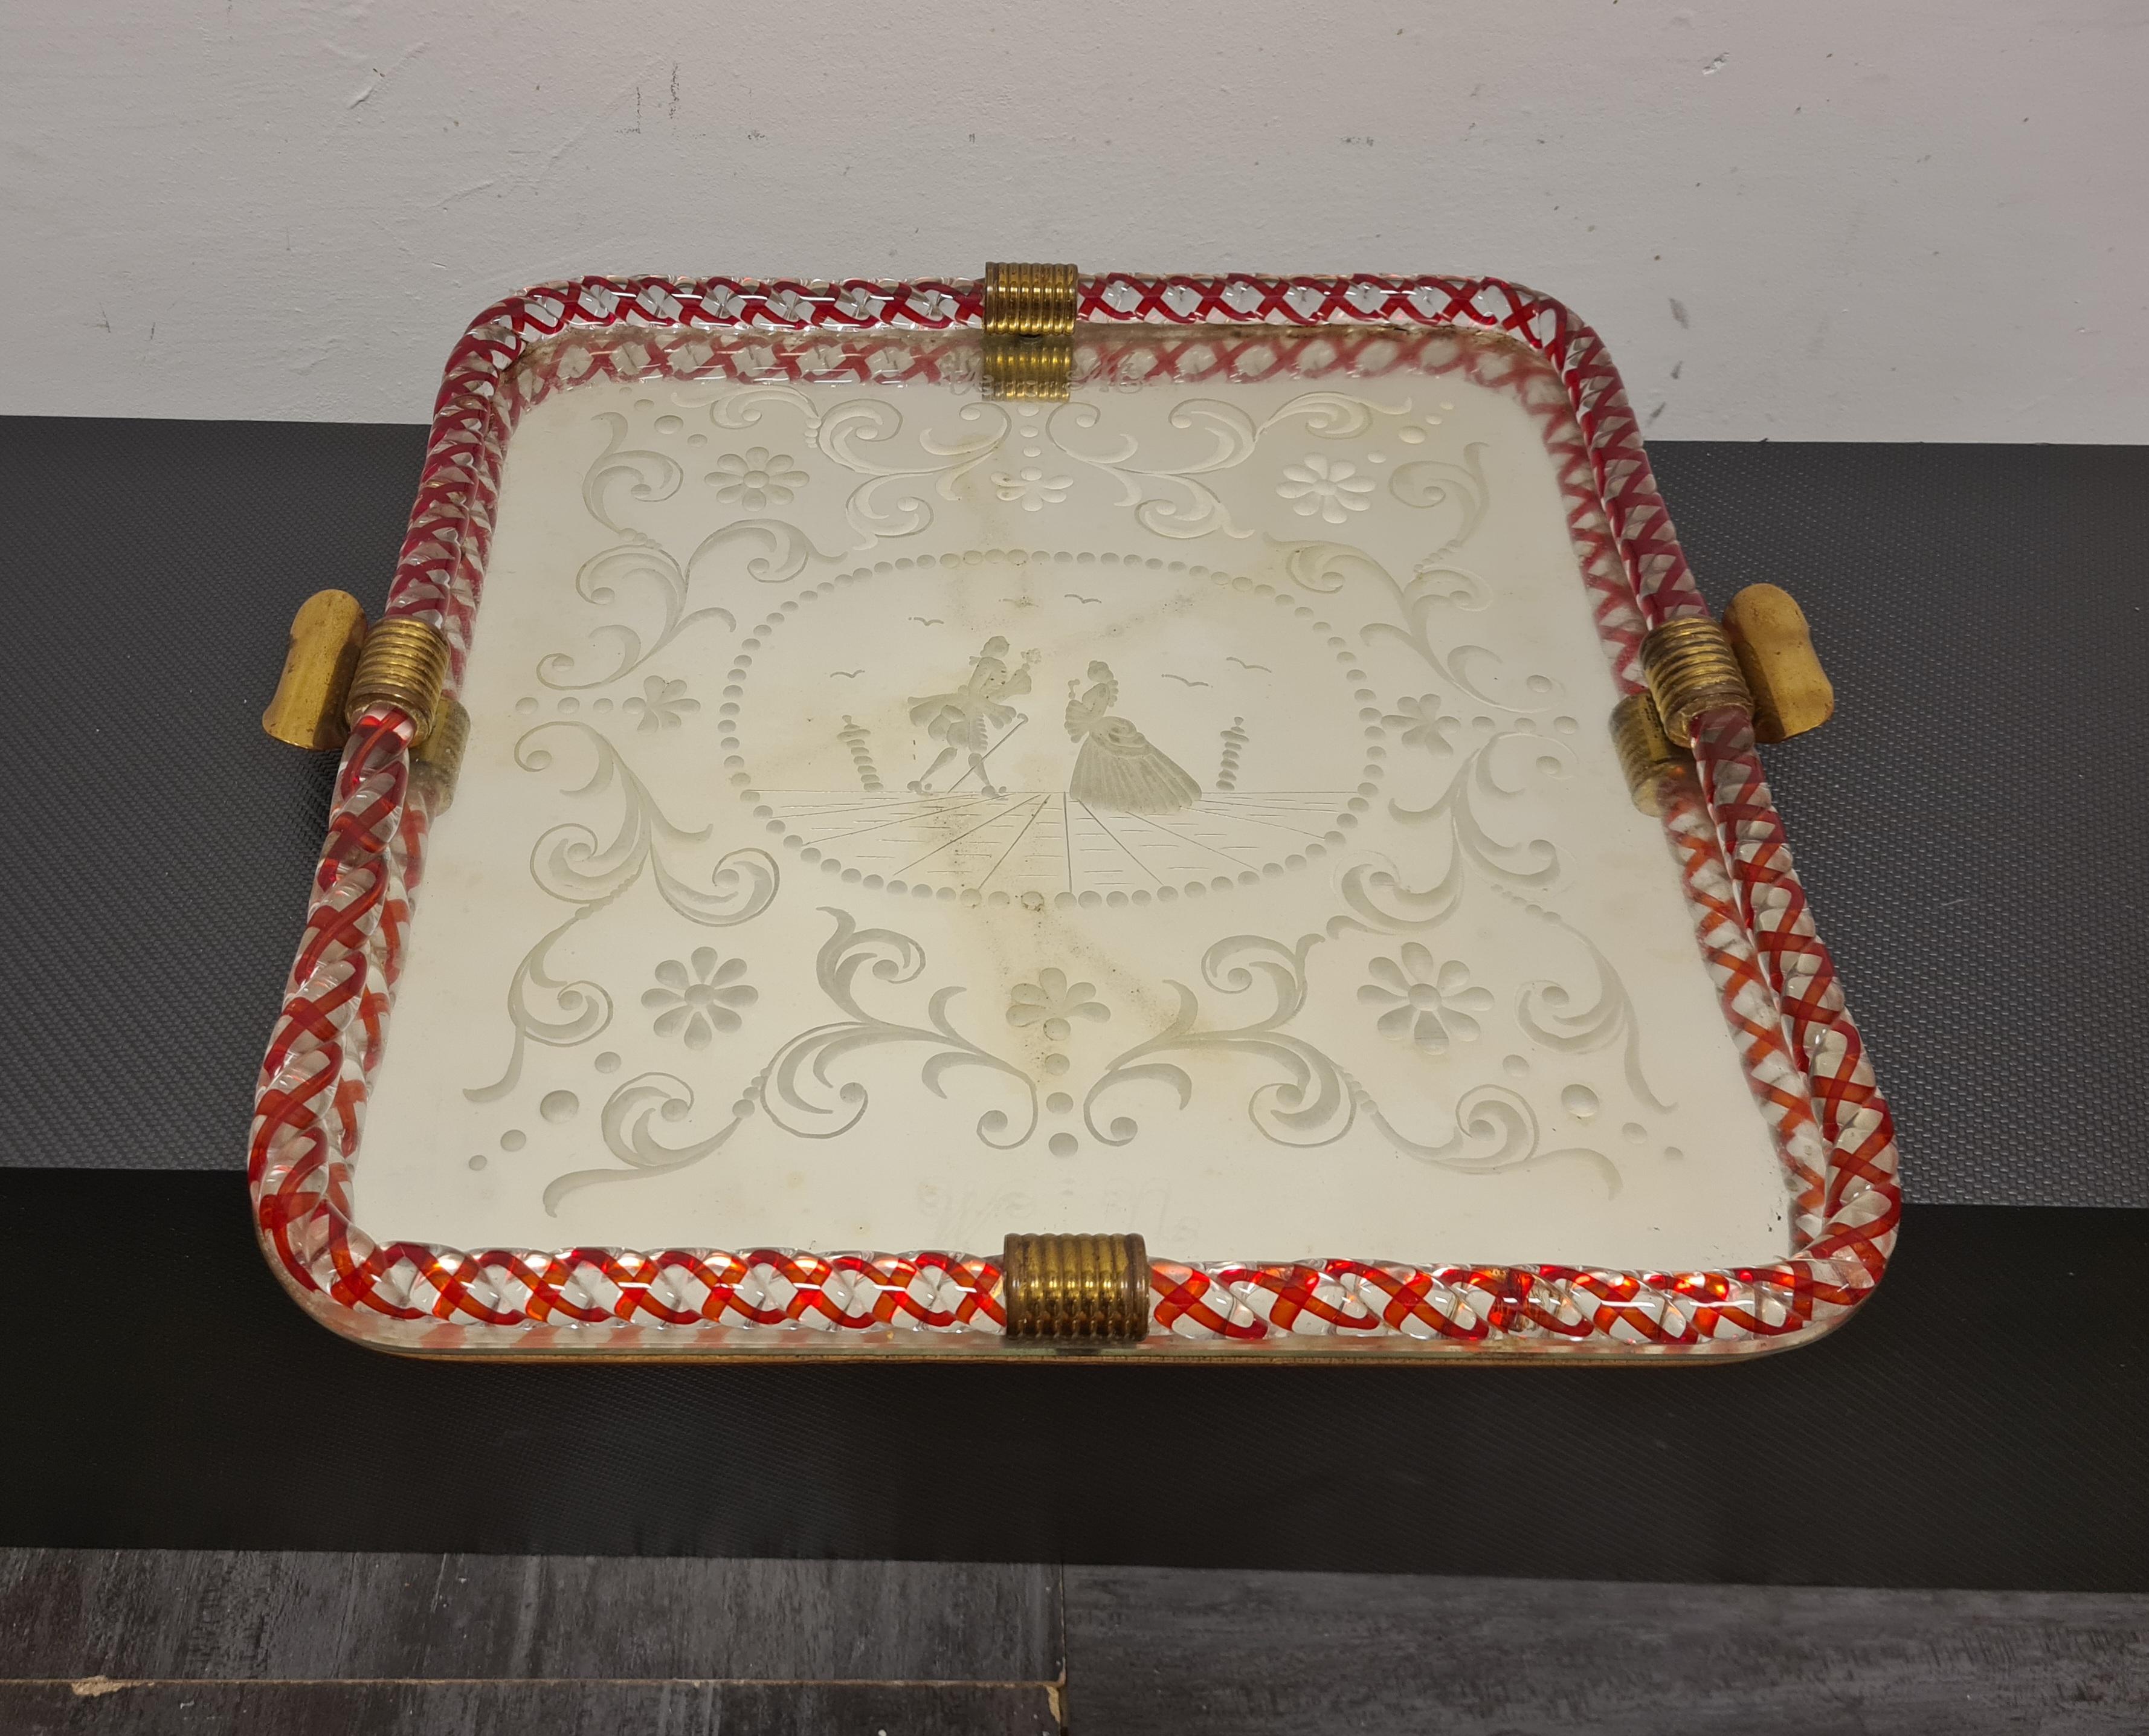 Mirrored tray by Ercole Barovier

Refined 1950s' tray with engraved mirror top.

Submerged glass rope edging and brass handles and details.

A scene depicting two lovers is engraved on the mirror top.

The mirror being mercury has inevitable signs